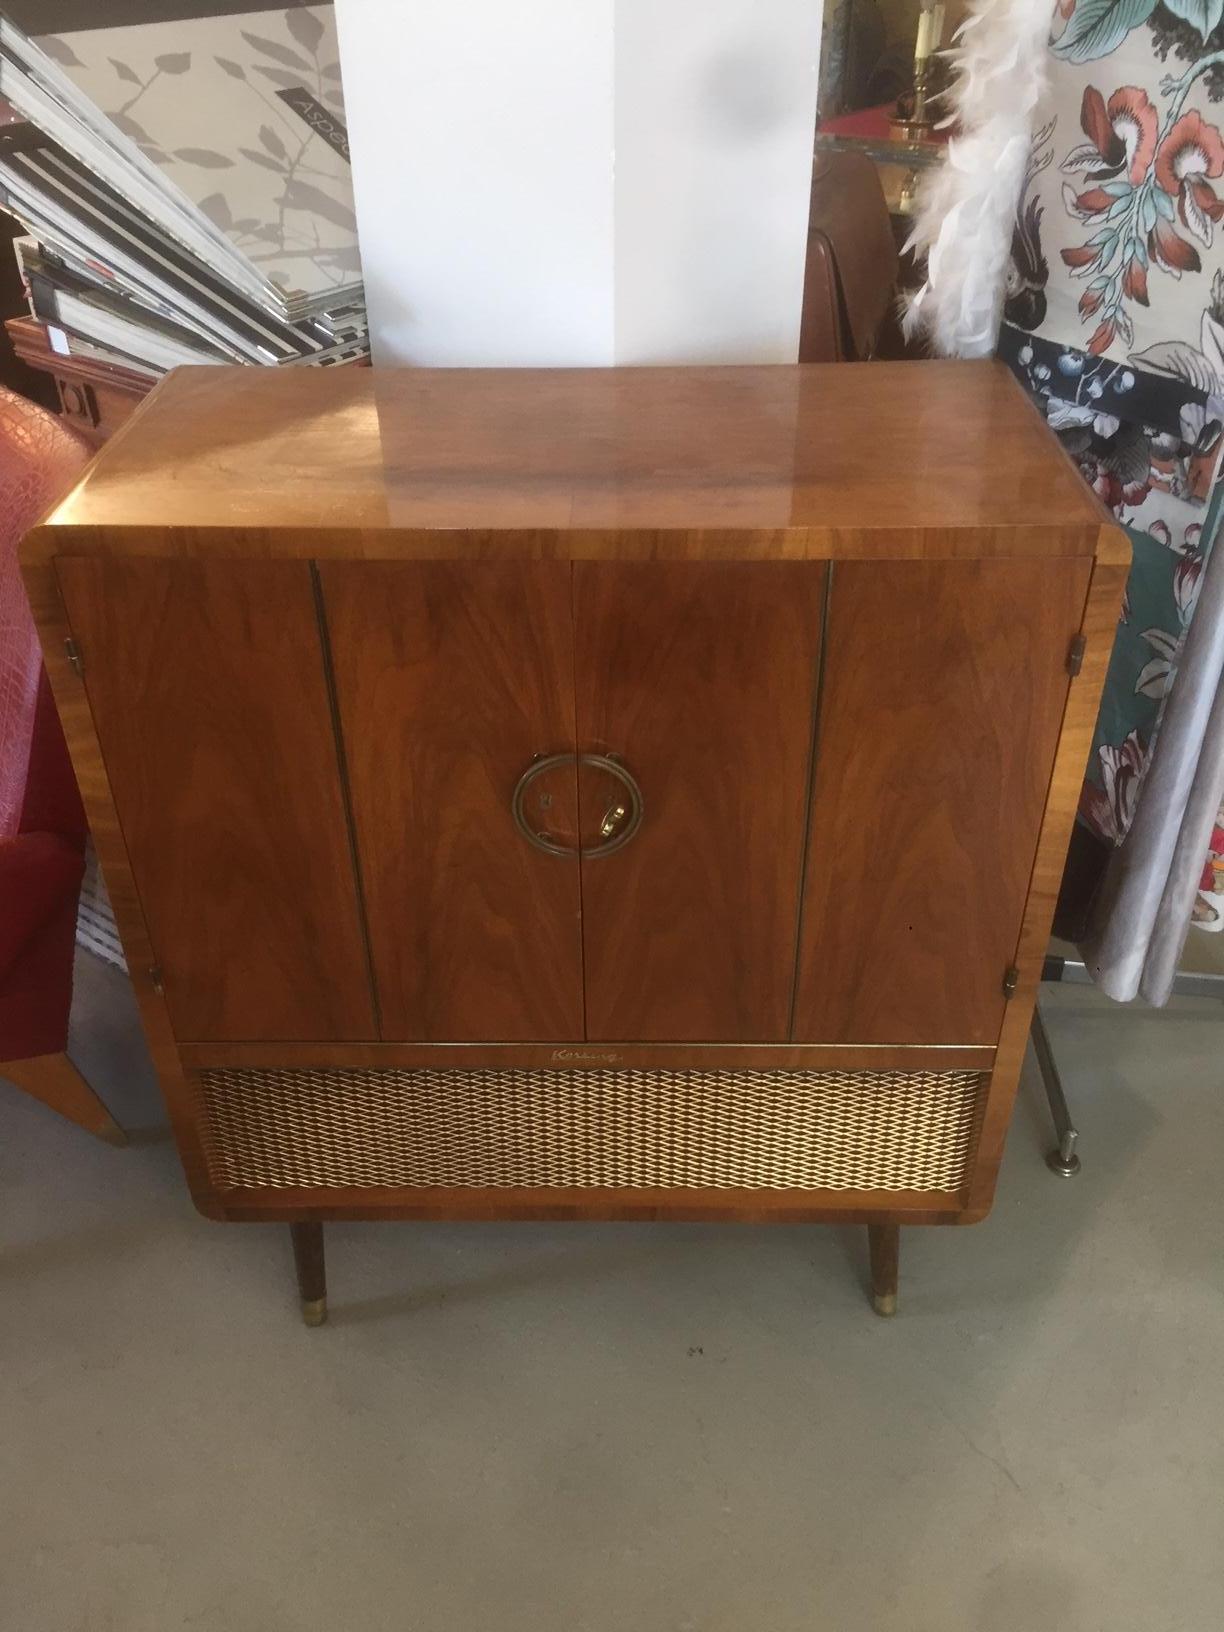 Very nice and rare vintage walnut and brass radio and vinyl cabinet from the 1950s by Korting.
Originals tuning pieces. It's working very well, the sound is good. For 45 and 33 rpm.
There is a light on the inside left. Folding doors with a gilded